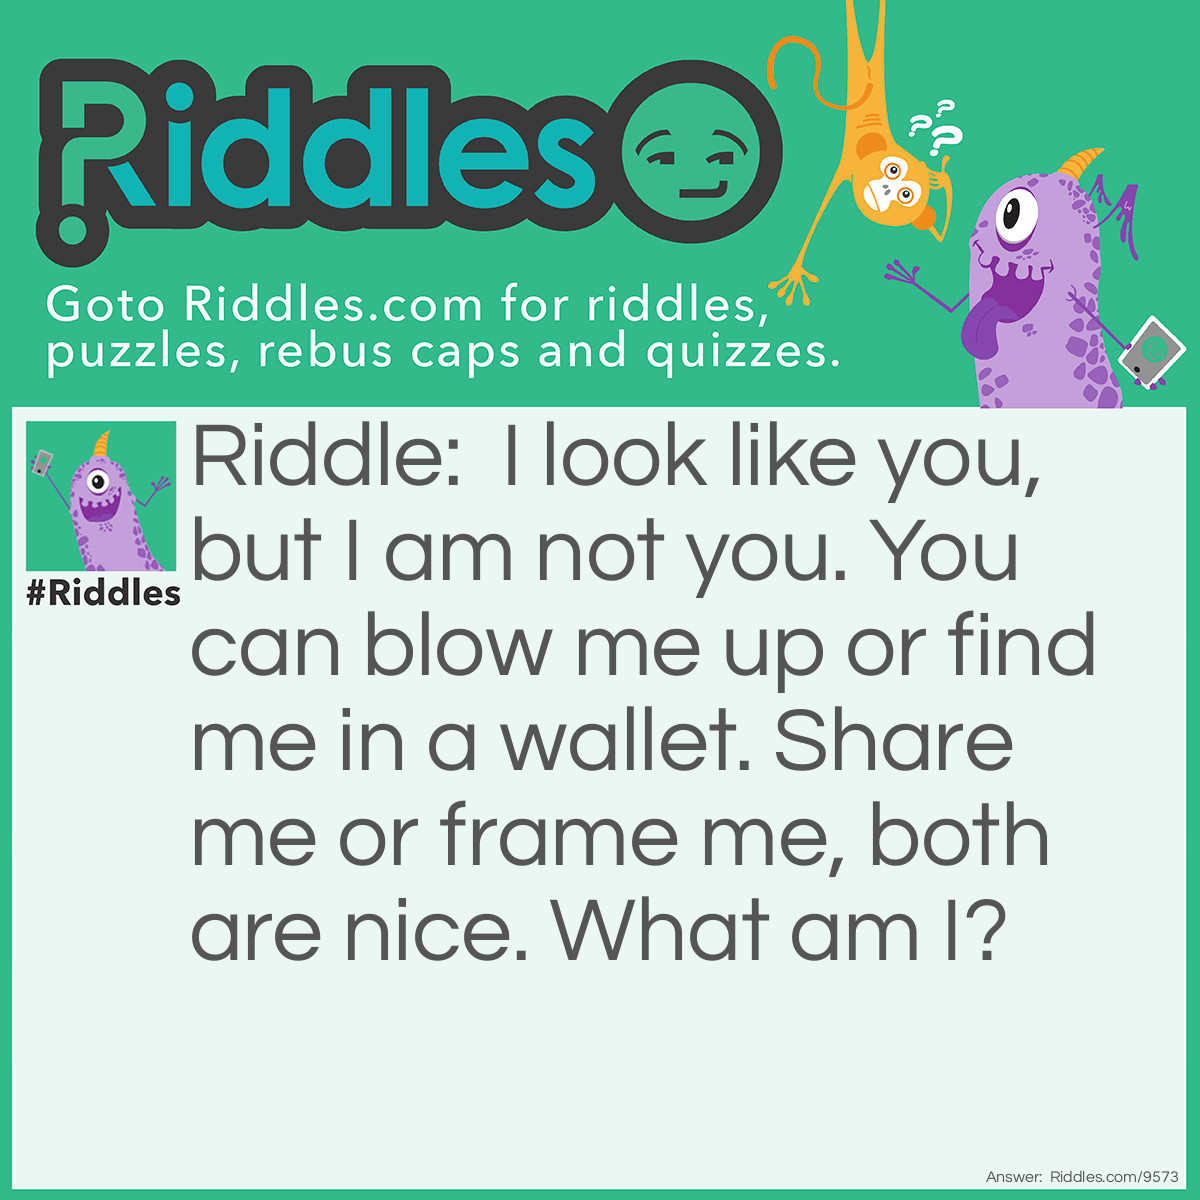 Riddle: I look like you, but I am not you. You can blow me up or find me in a wallet. Share me or frame me, both are nice. What am I? Answer: Your picture!